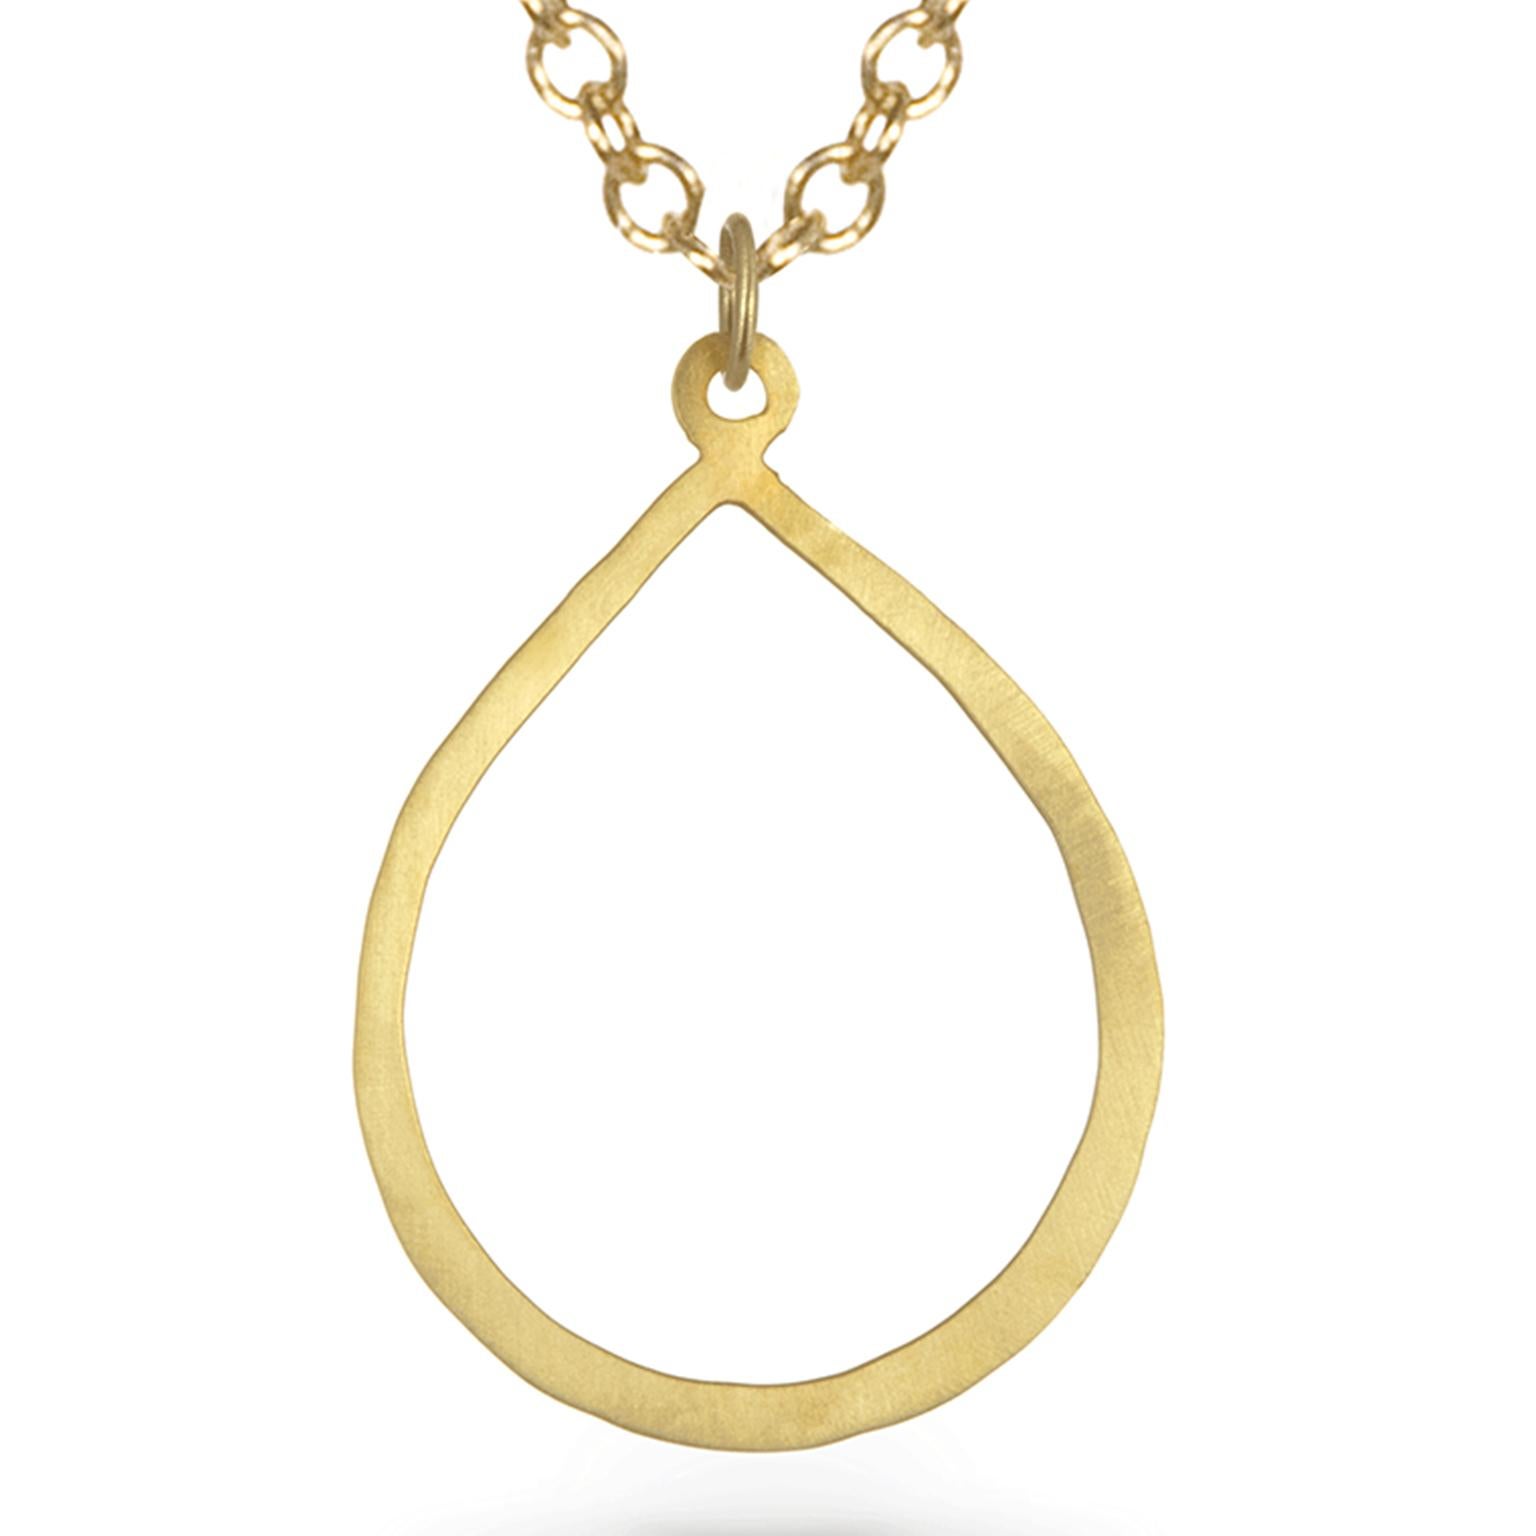 Simple, elegant and timeless - the tear drop shaped pendant is handmade in 18k Green* gold.  Matte finished and lightly hammered for added texture.  
2 inch long.   18k gold cable chain 16 inch -18 inch adjustable

Pendant ($465) and 
18k 1.5mm